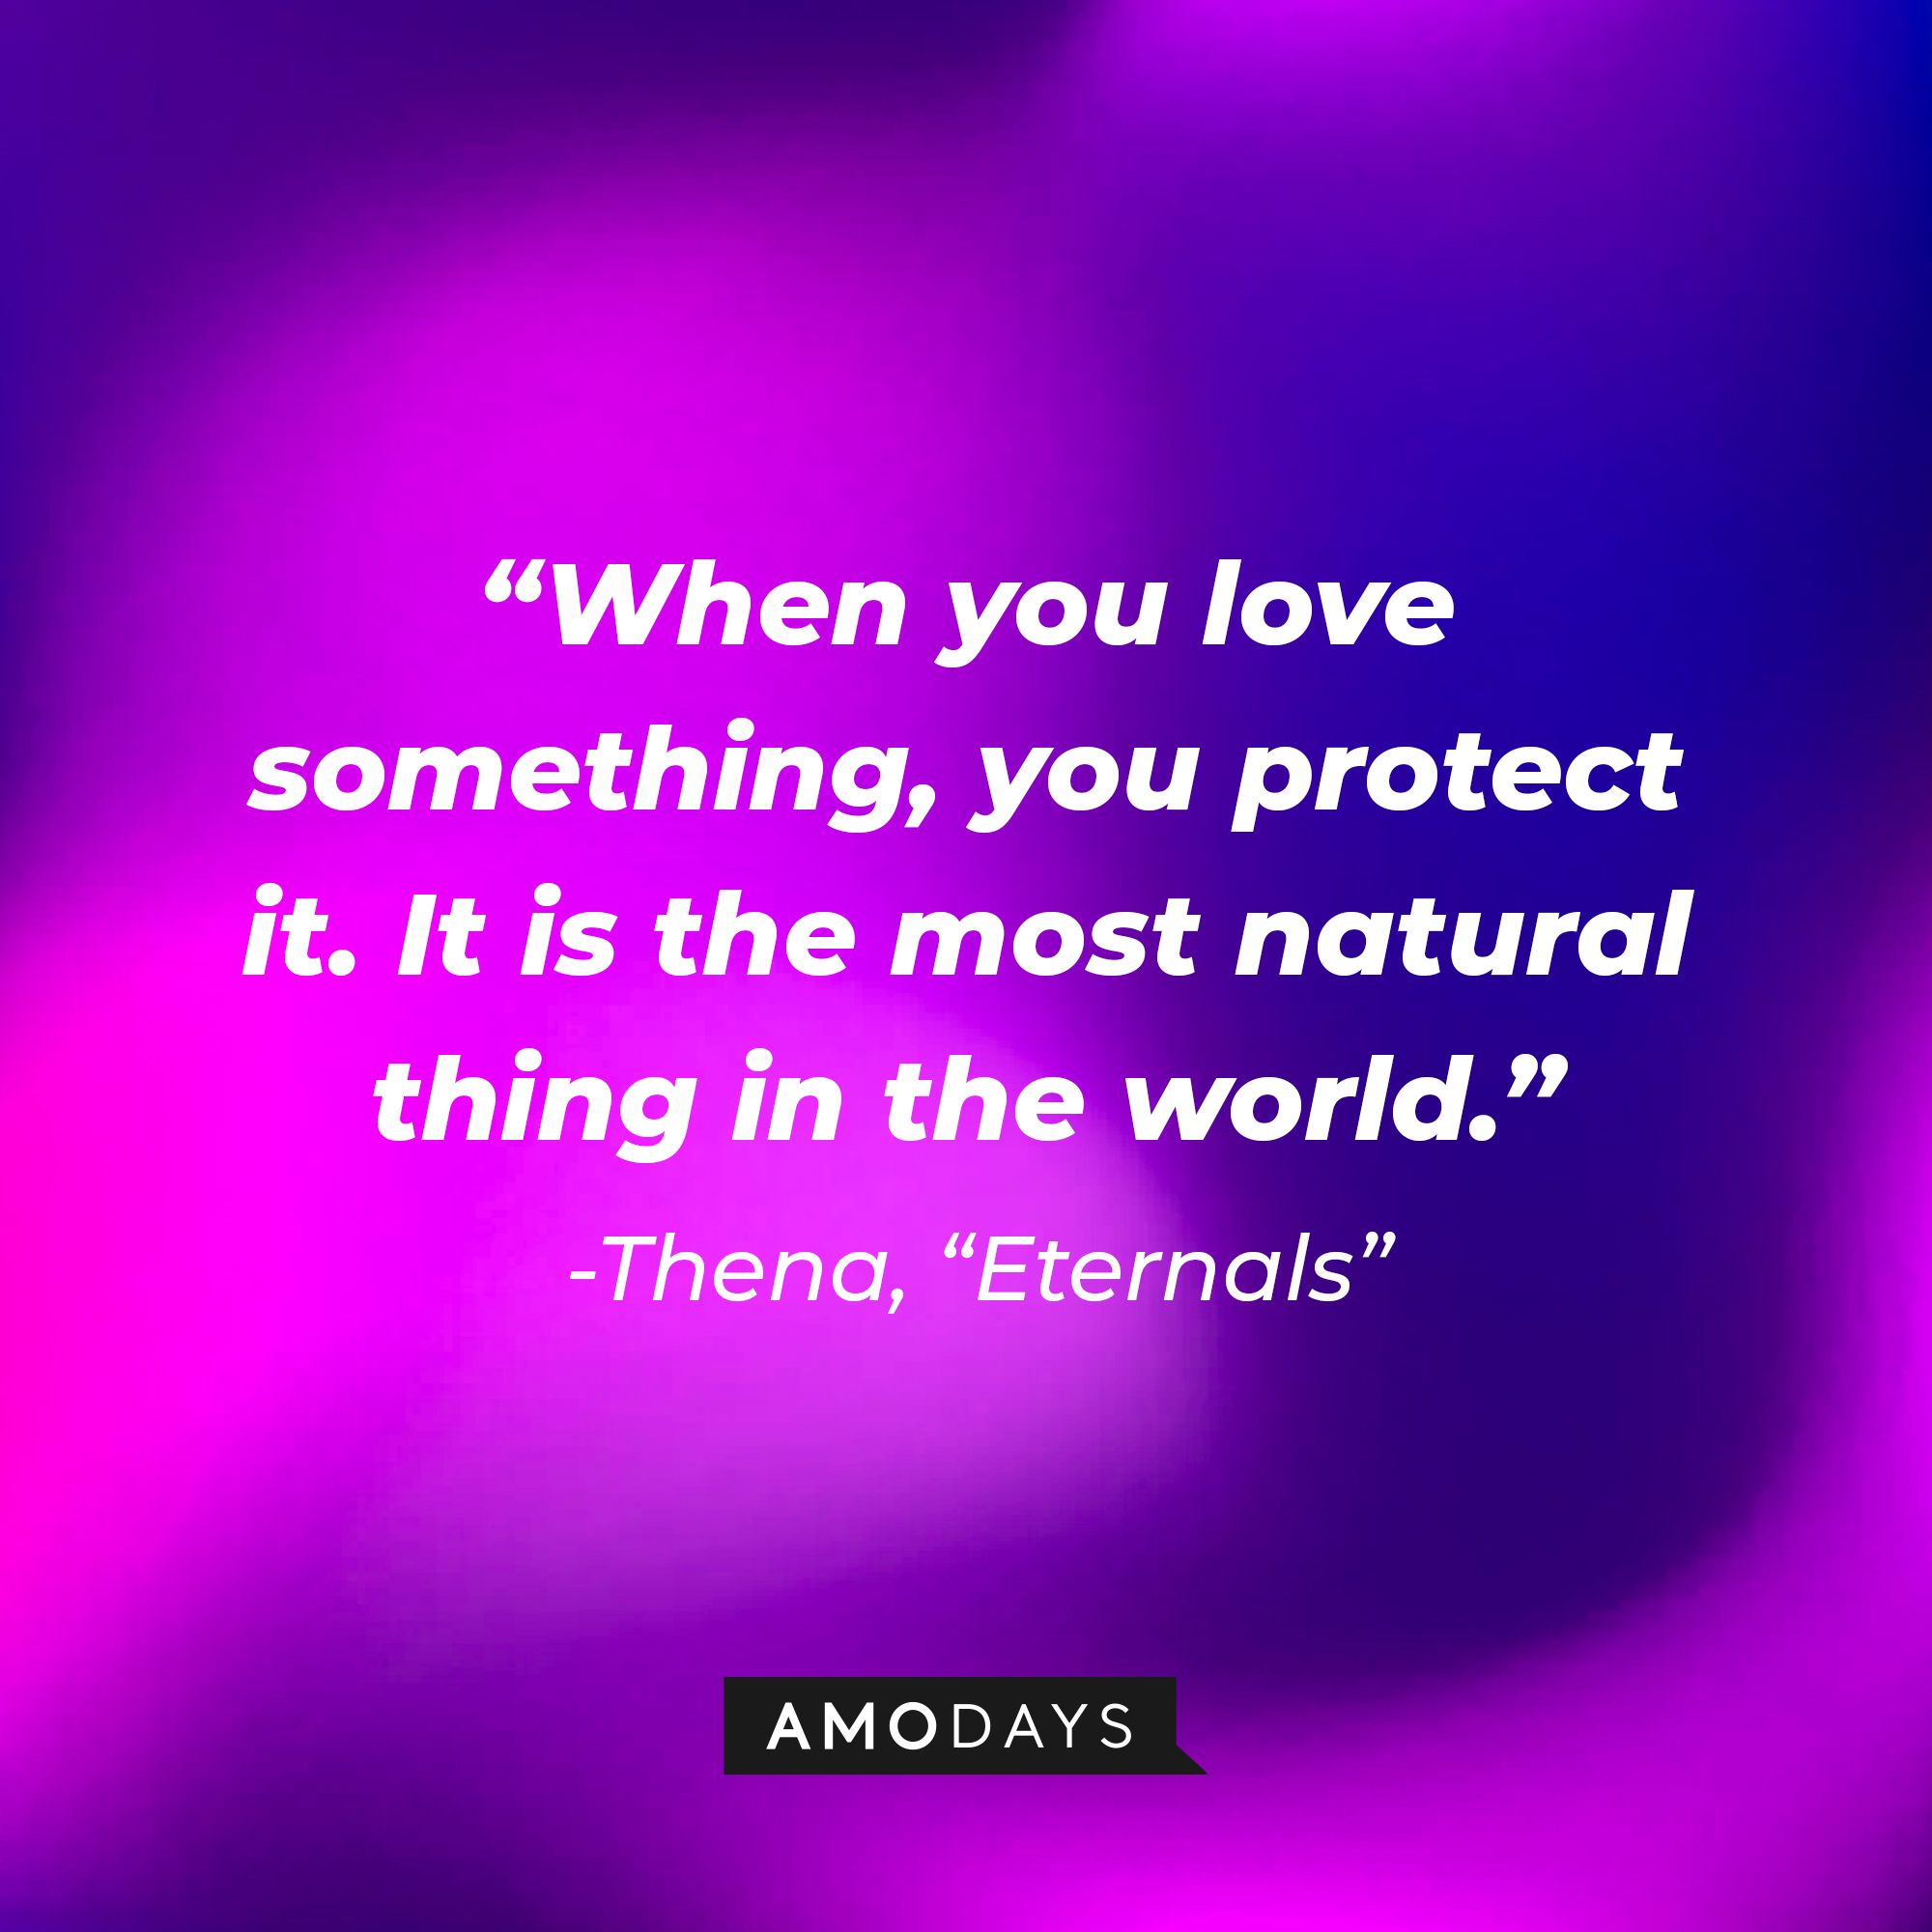 Thena’s quote: "When you love something, you protect it. It is the most natural thing in the world." | Image: AmoDays